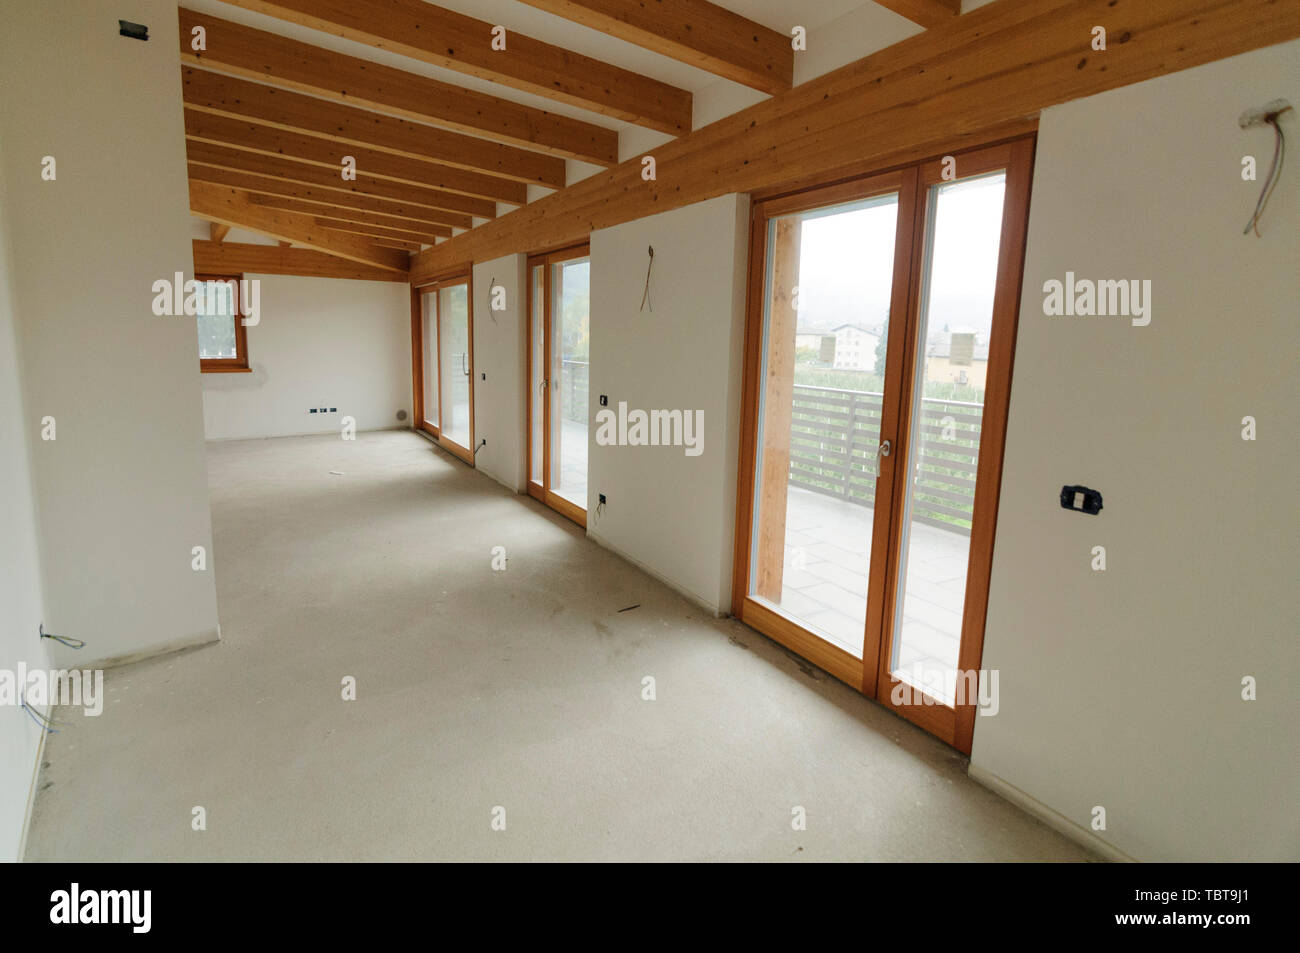 Building site or home renovation in progress: empty open space with large windows and exposed wooden beams Stock Photo